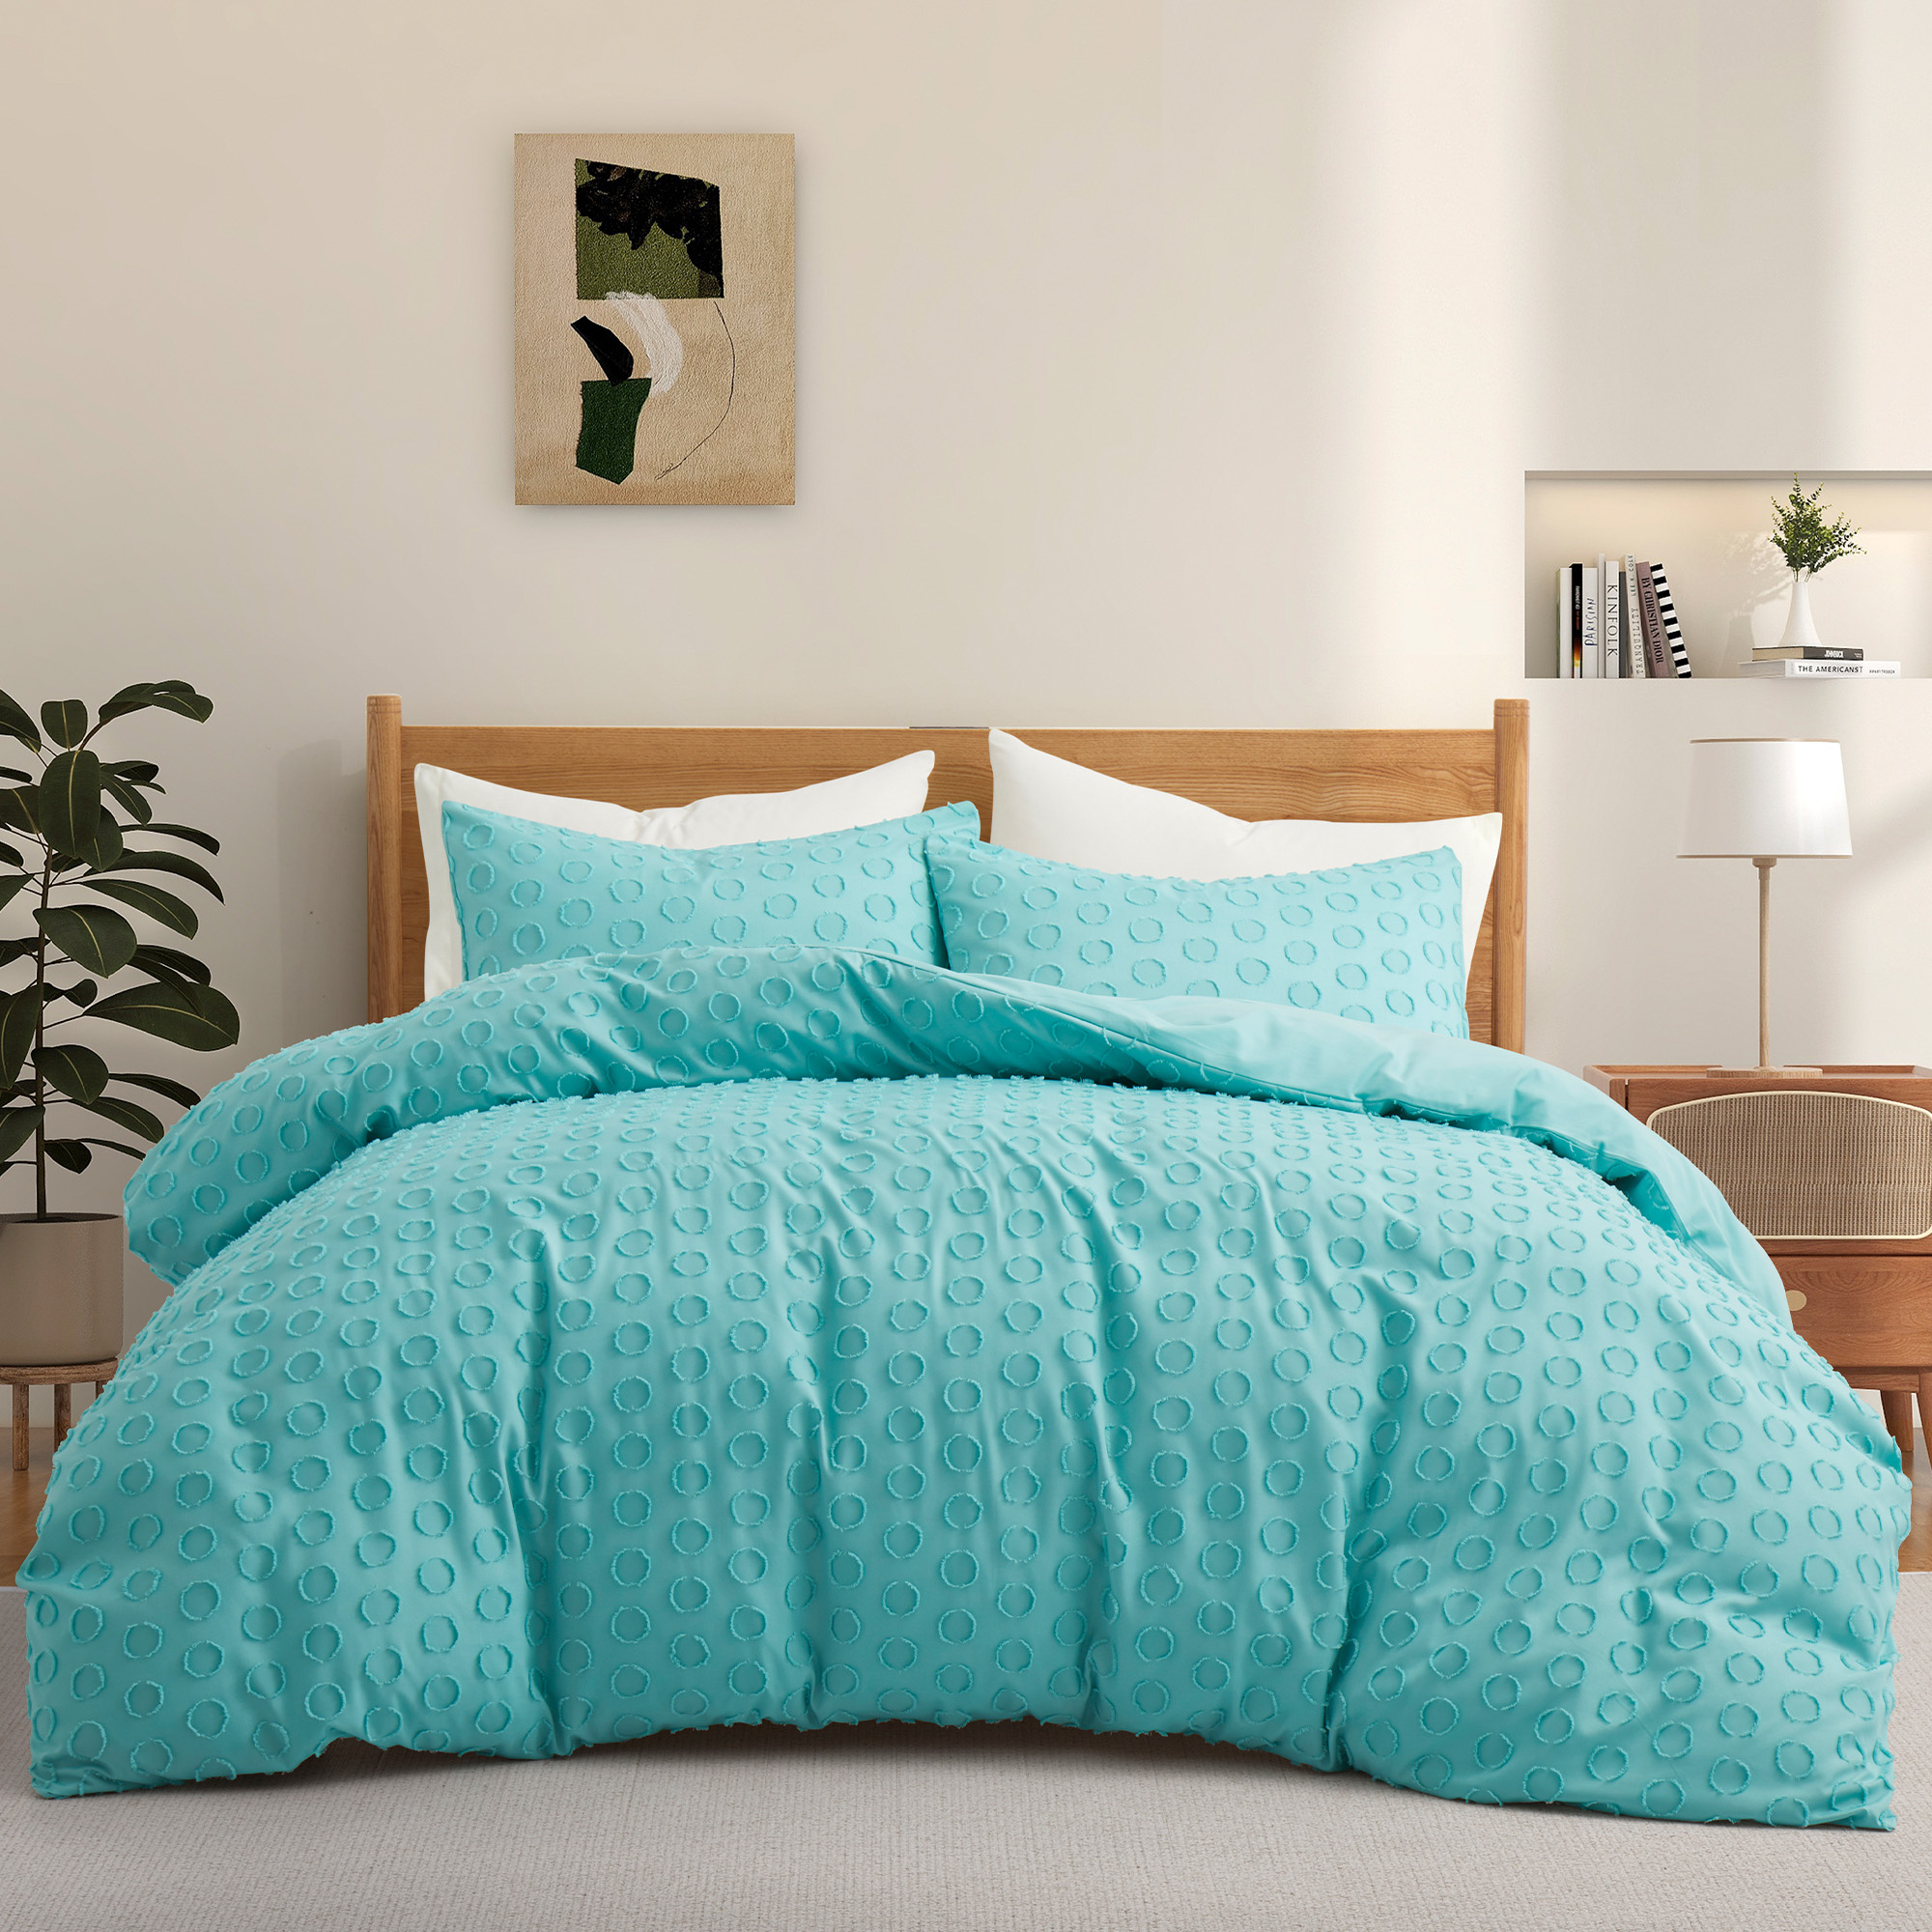 Luxury Bedding Soft Microfiber Duvet Cover And Sham Set - Teal, Twin